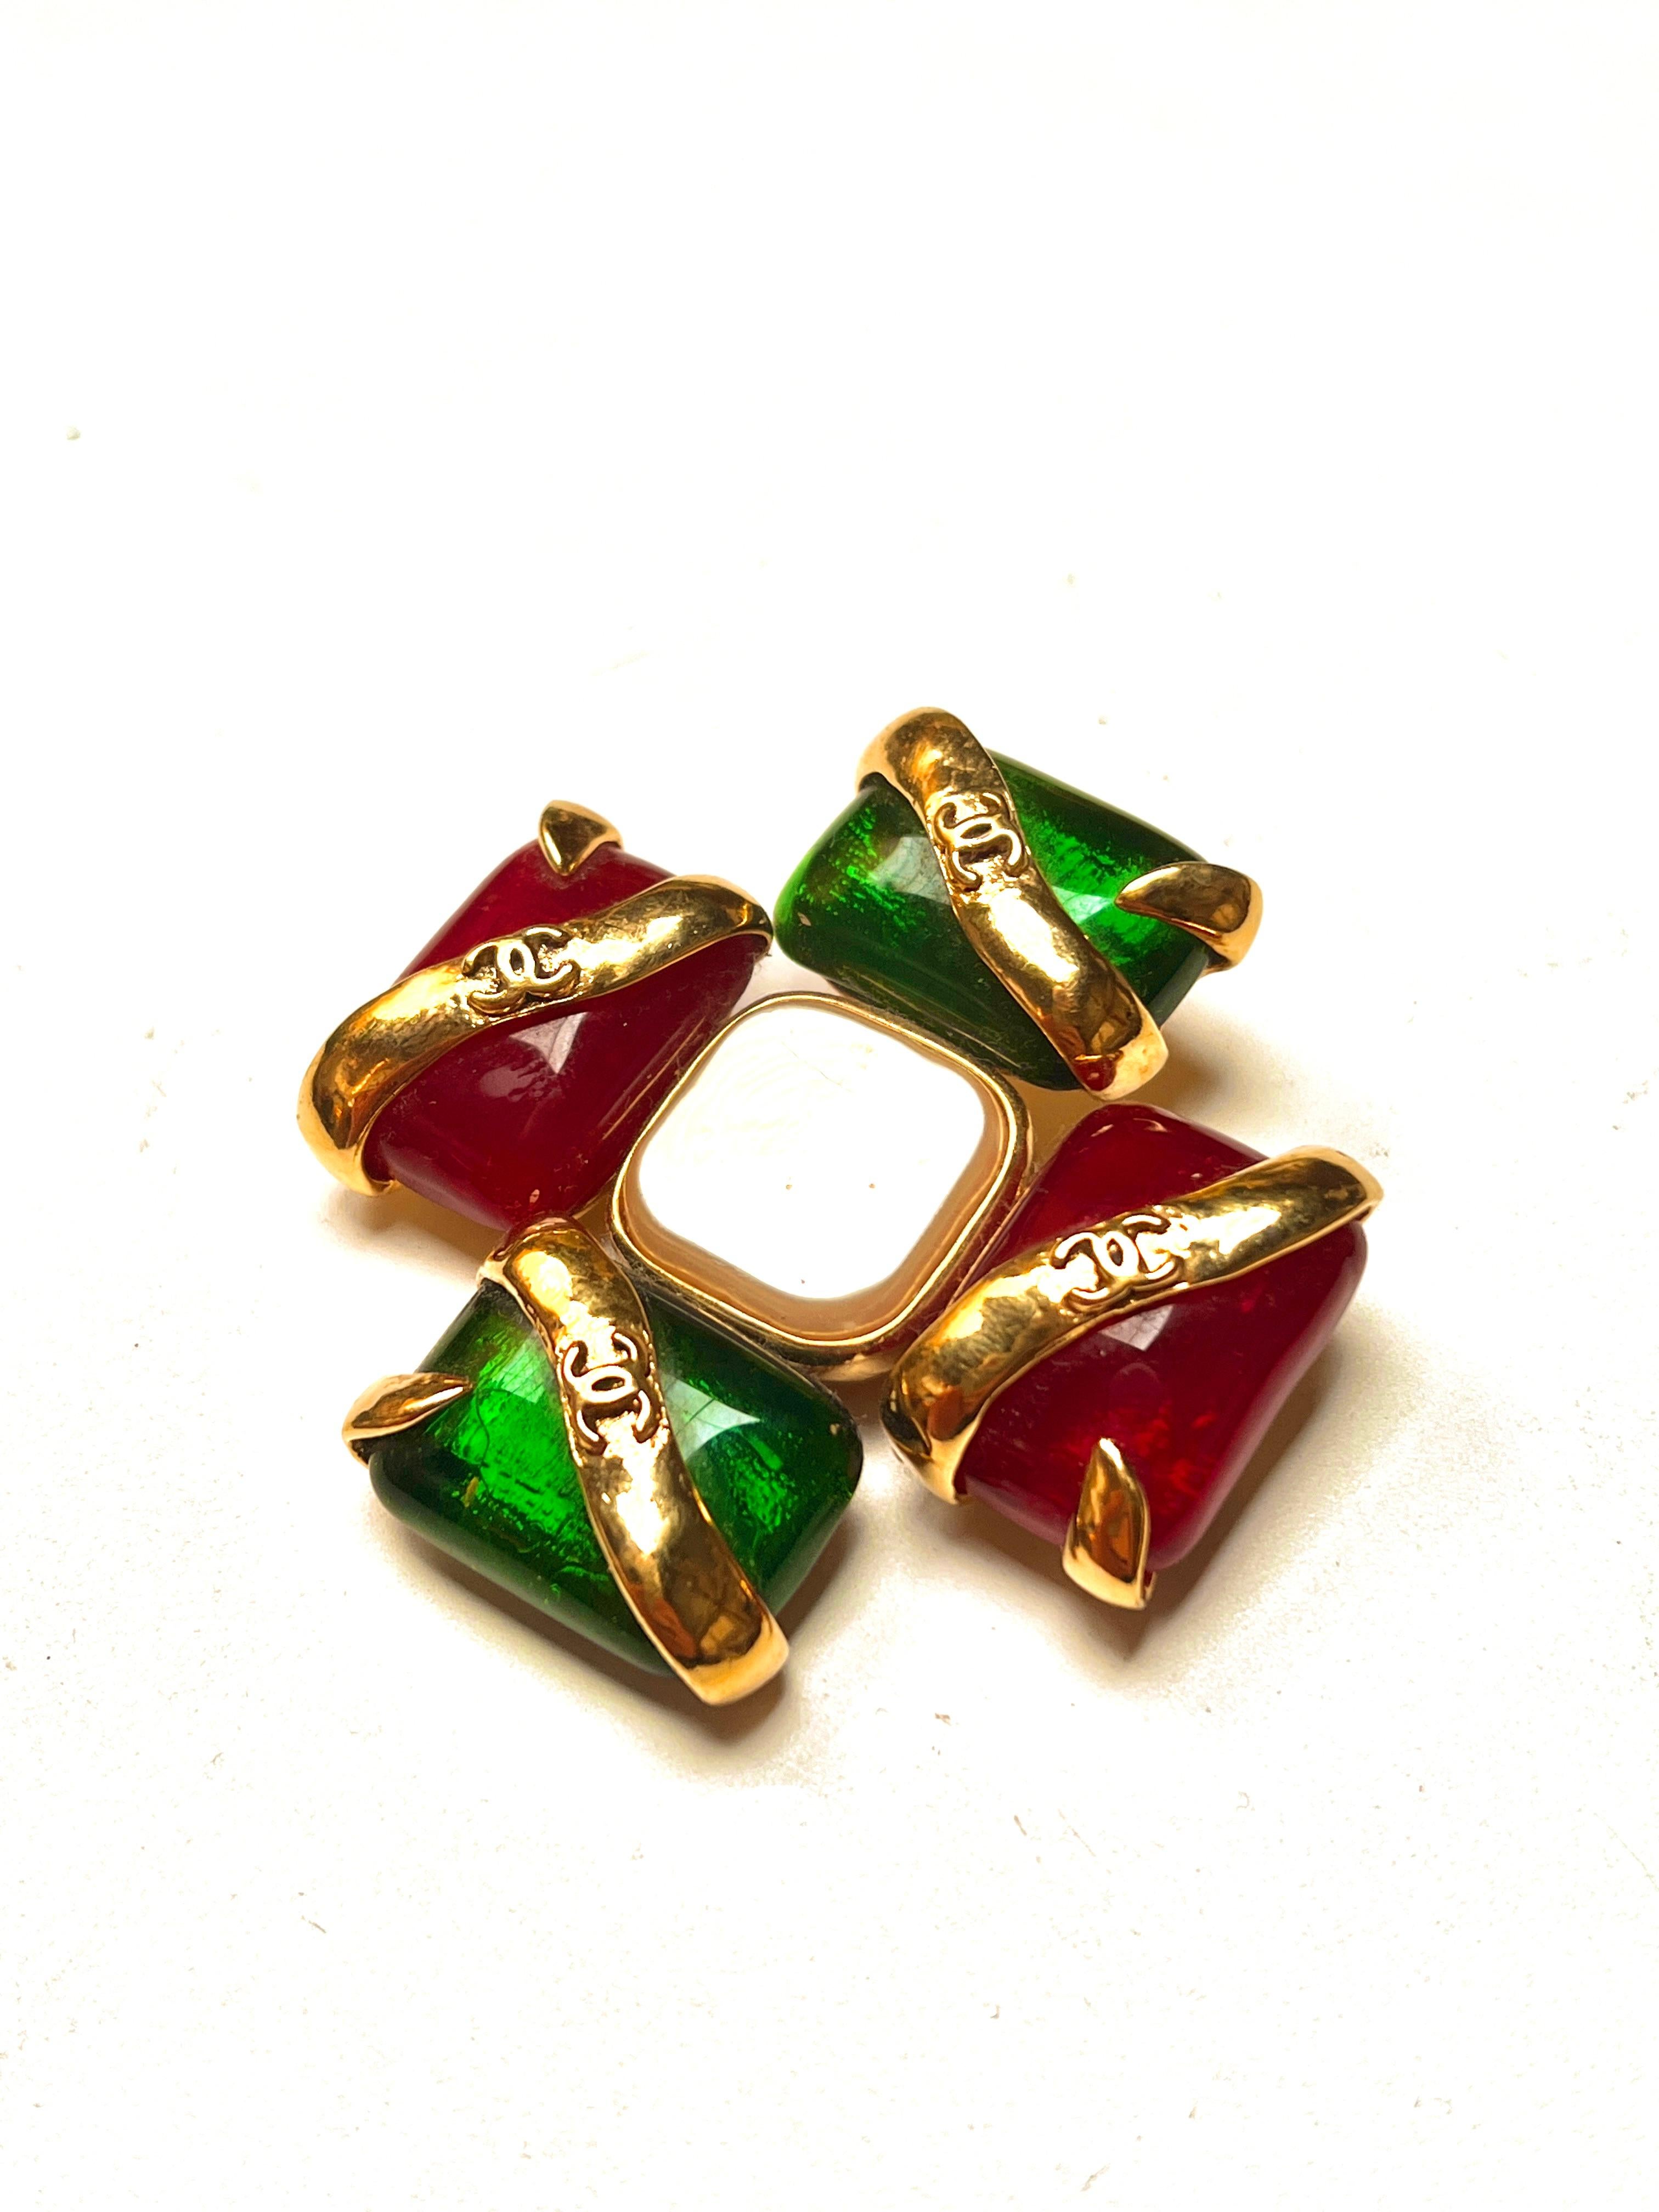 A beautiful early signed and dated Chanel brooch from the 1990s made by Robert Goossens Paris.  The beautiful green and red glass stones from the House of Gripoix, centered around one large Faux-pearl. The stones are wrapped in gold colored bands